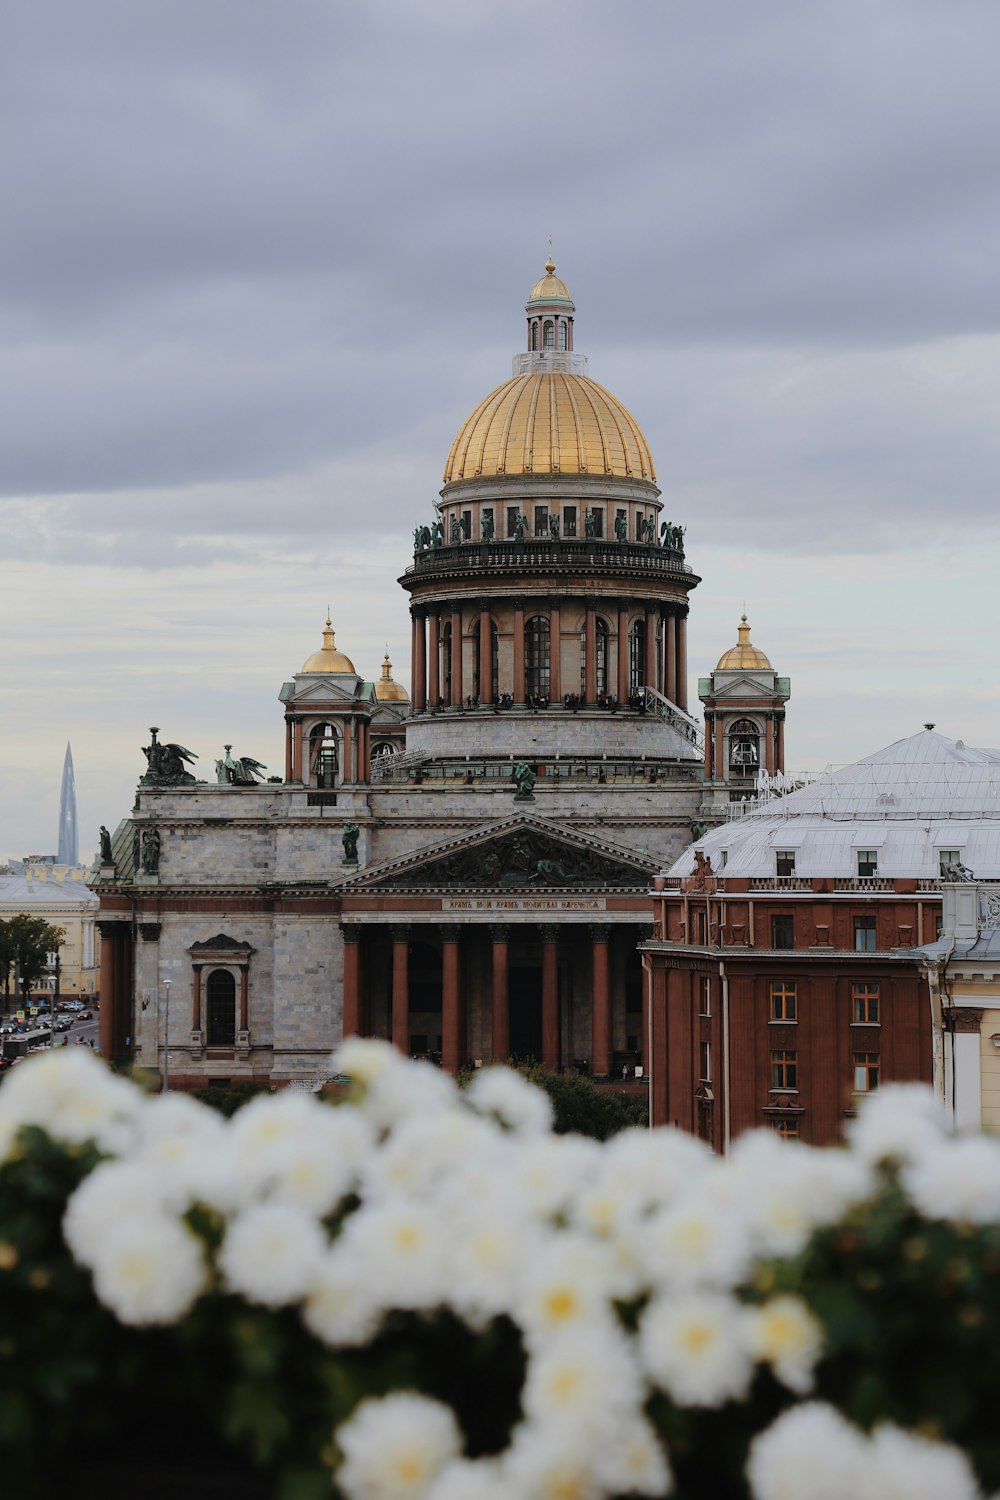 white flowers in front of a building with a golden dome